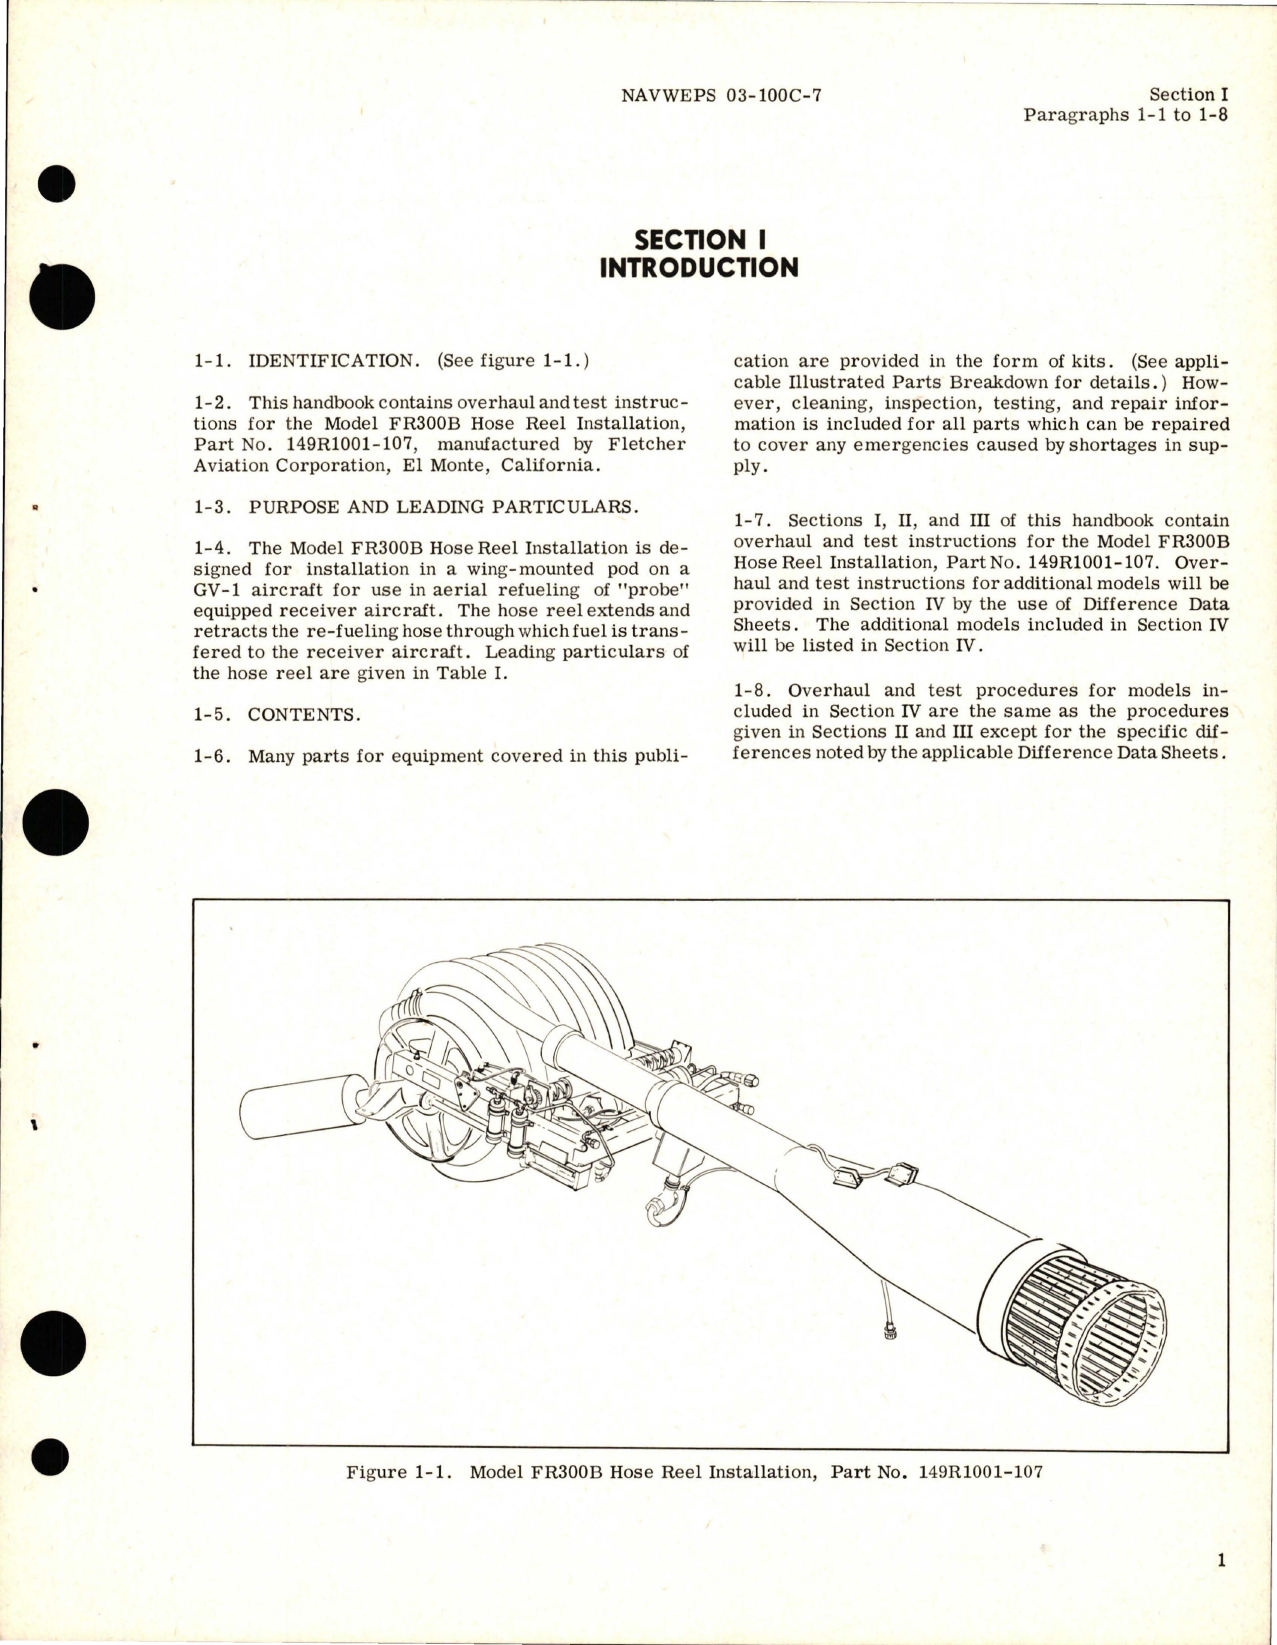 Sample page 5 from AirCorps Library document: Overhaul Instructions for Hose Reel Installation - Model FR300B - Part 149R1001-107